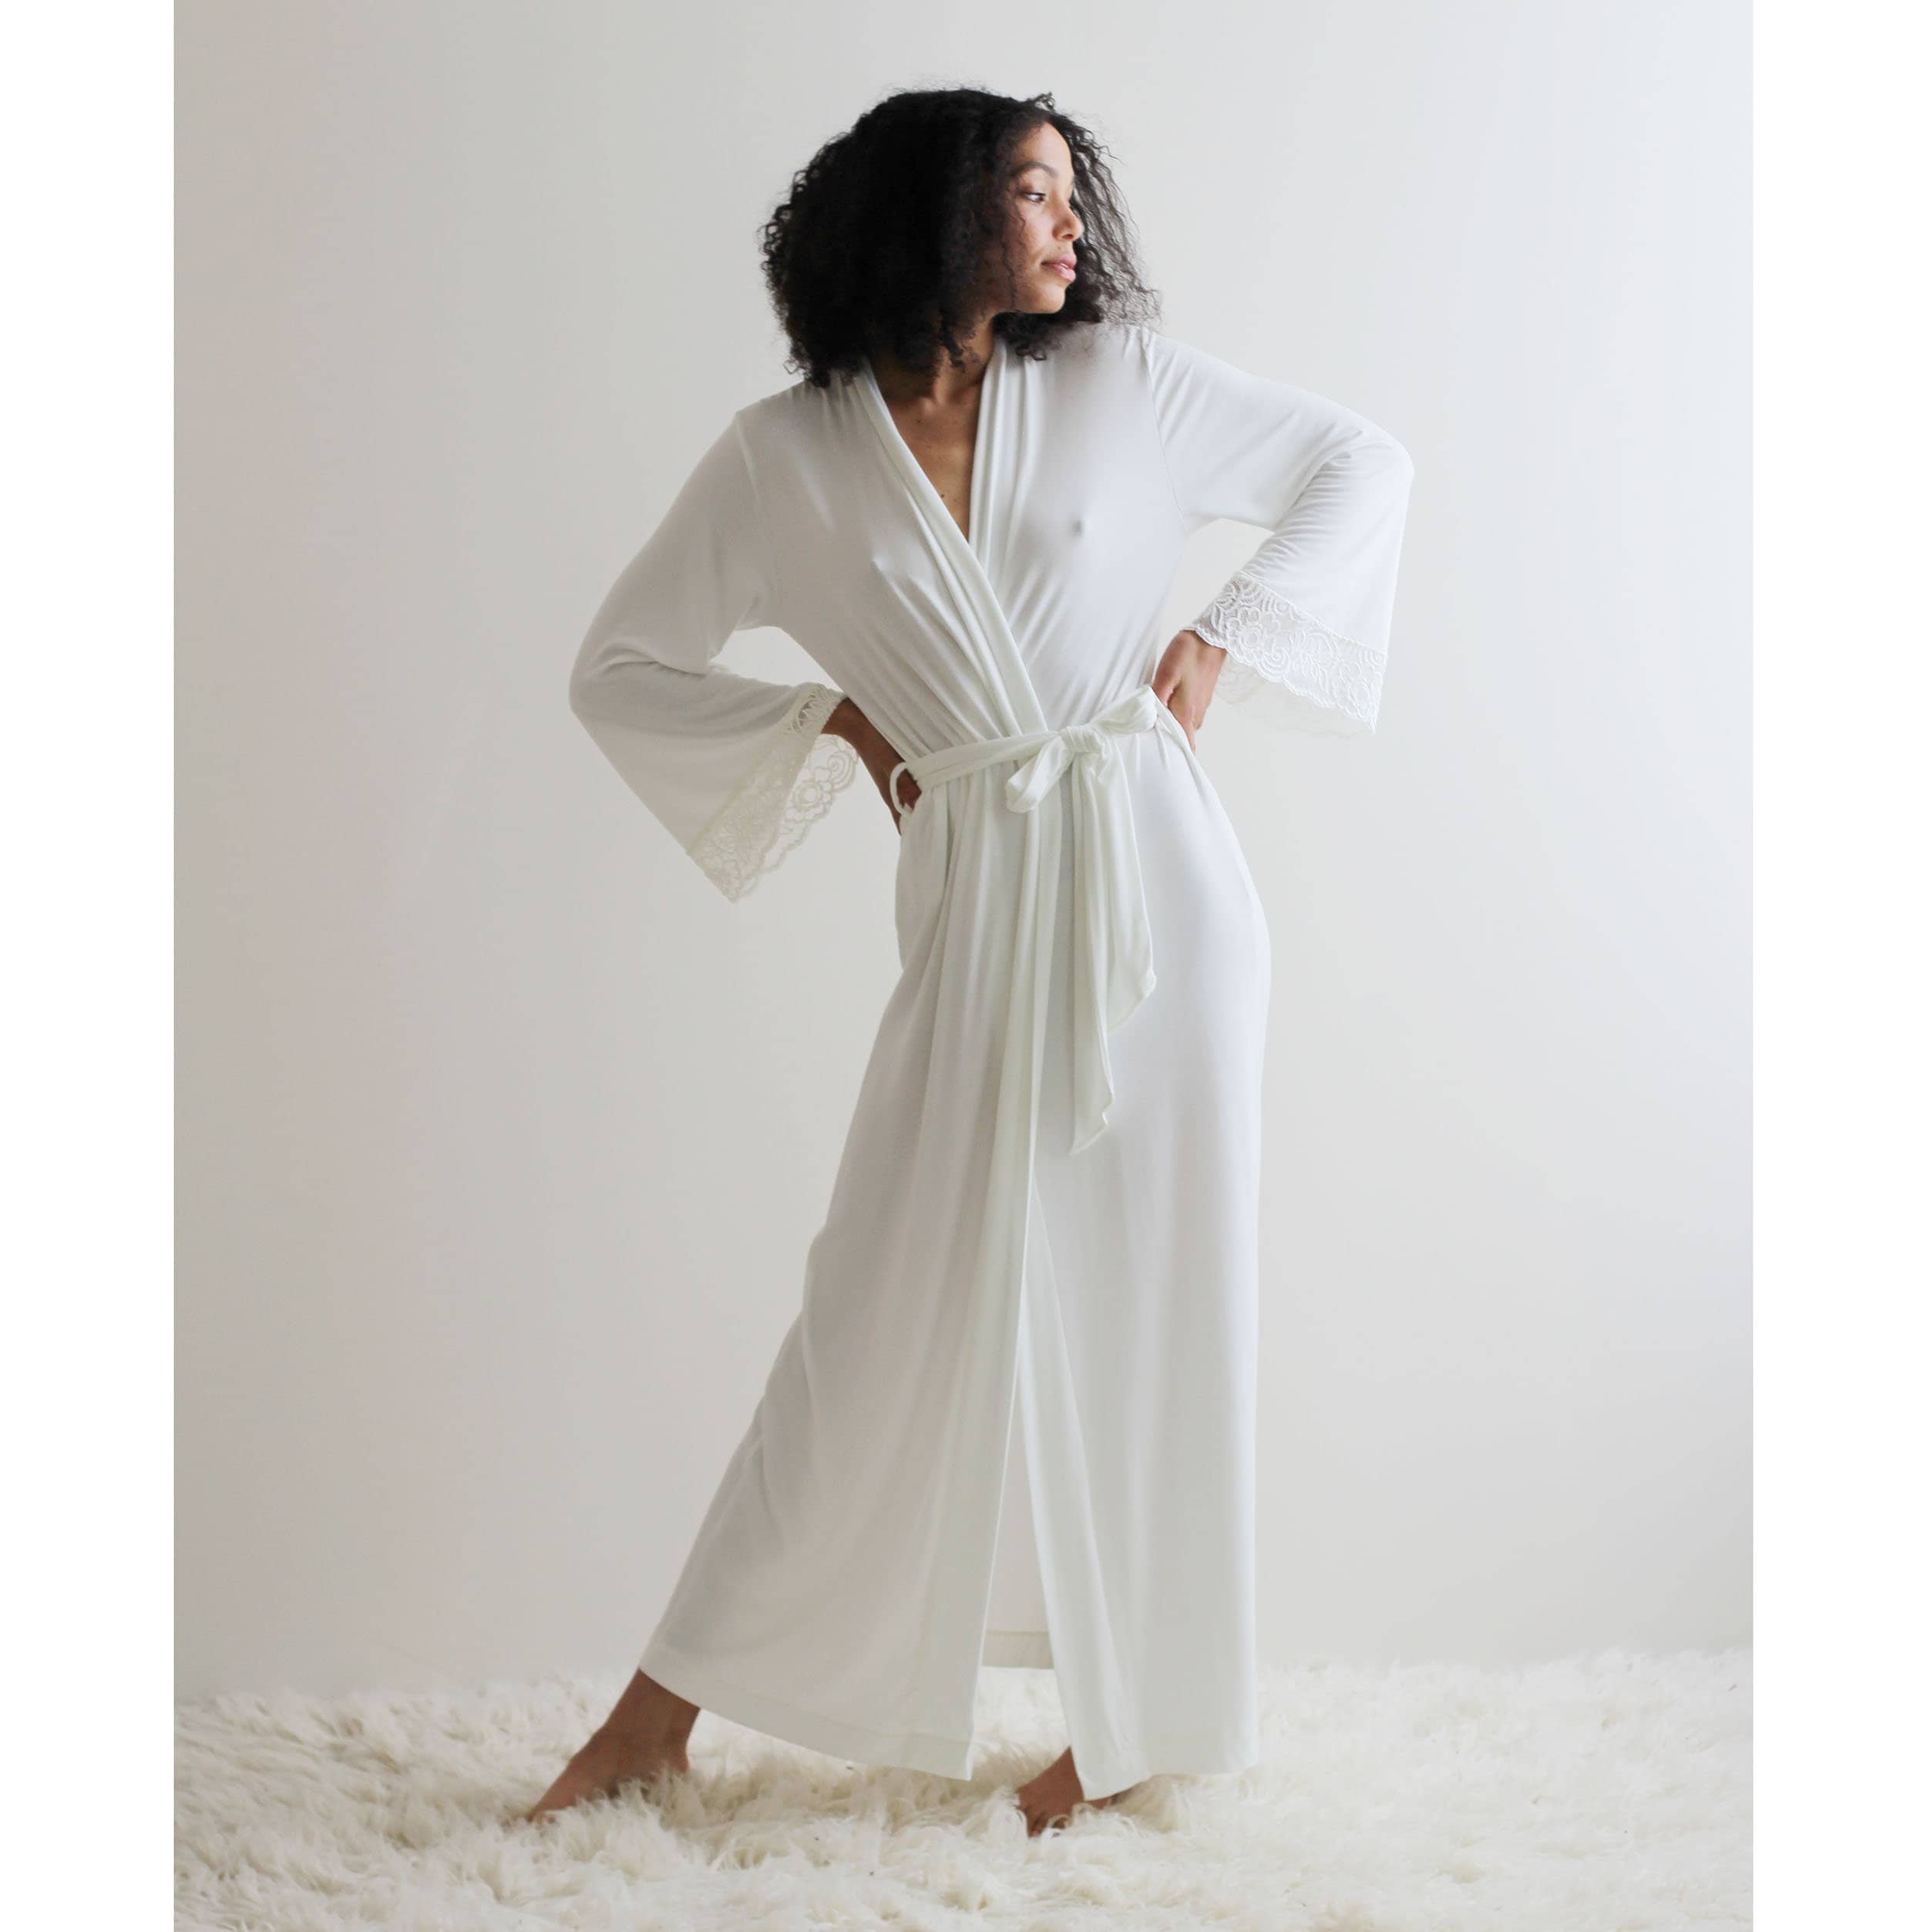 Full Length Robe with lace trimmed sleeves, Ivory Robe, Bridal Robe, Bamboo Robe - Cathedral womens bamboo sleepwear range - Ready to Ship